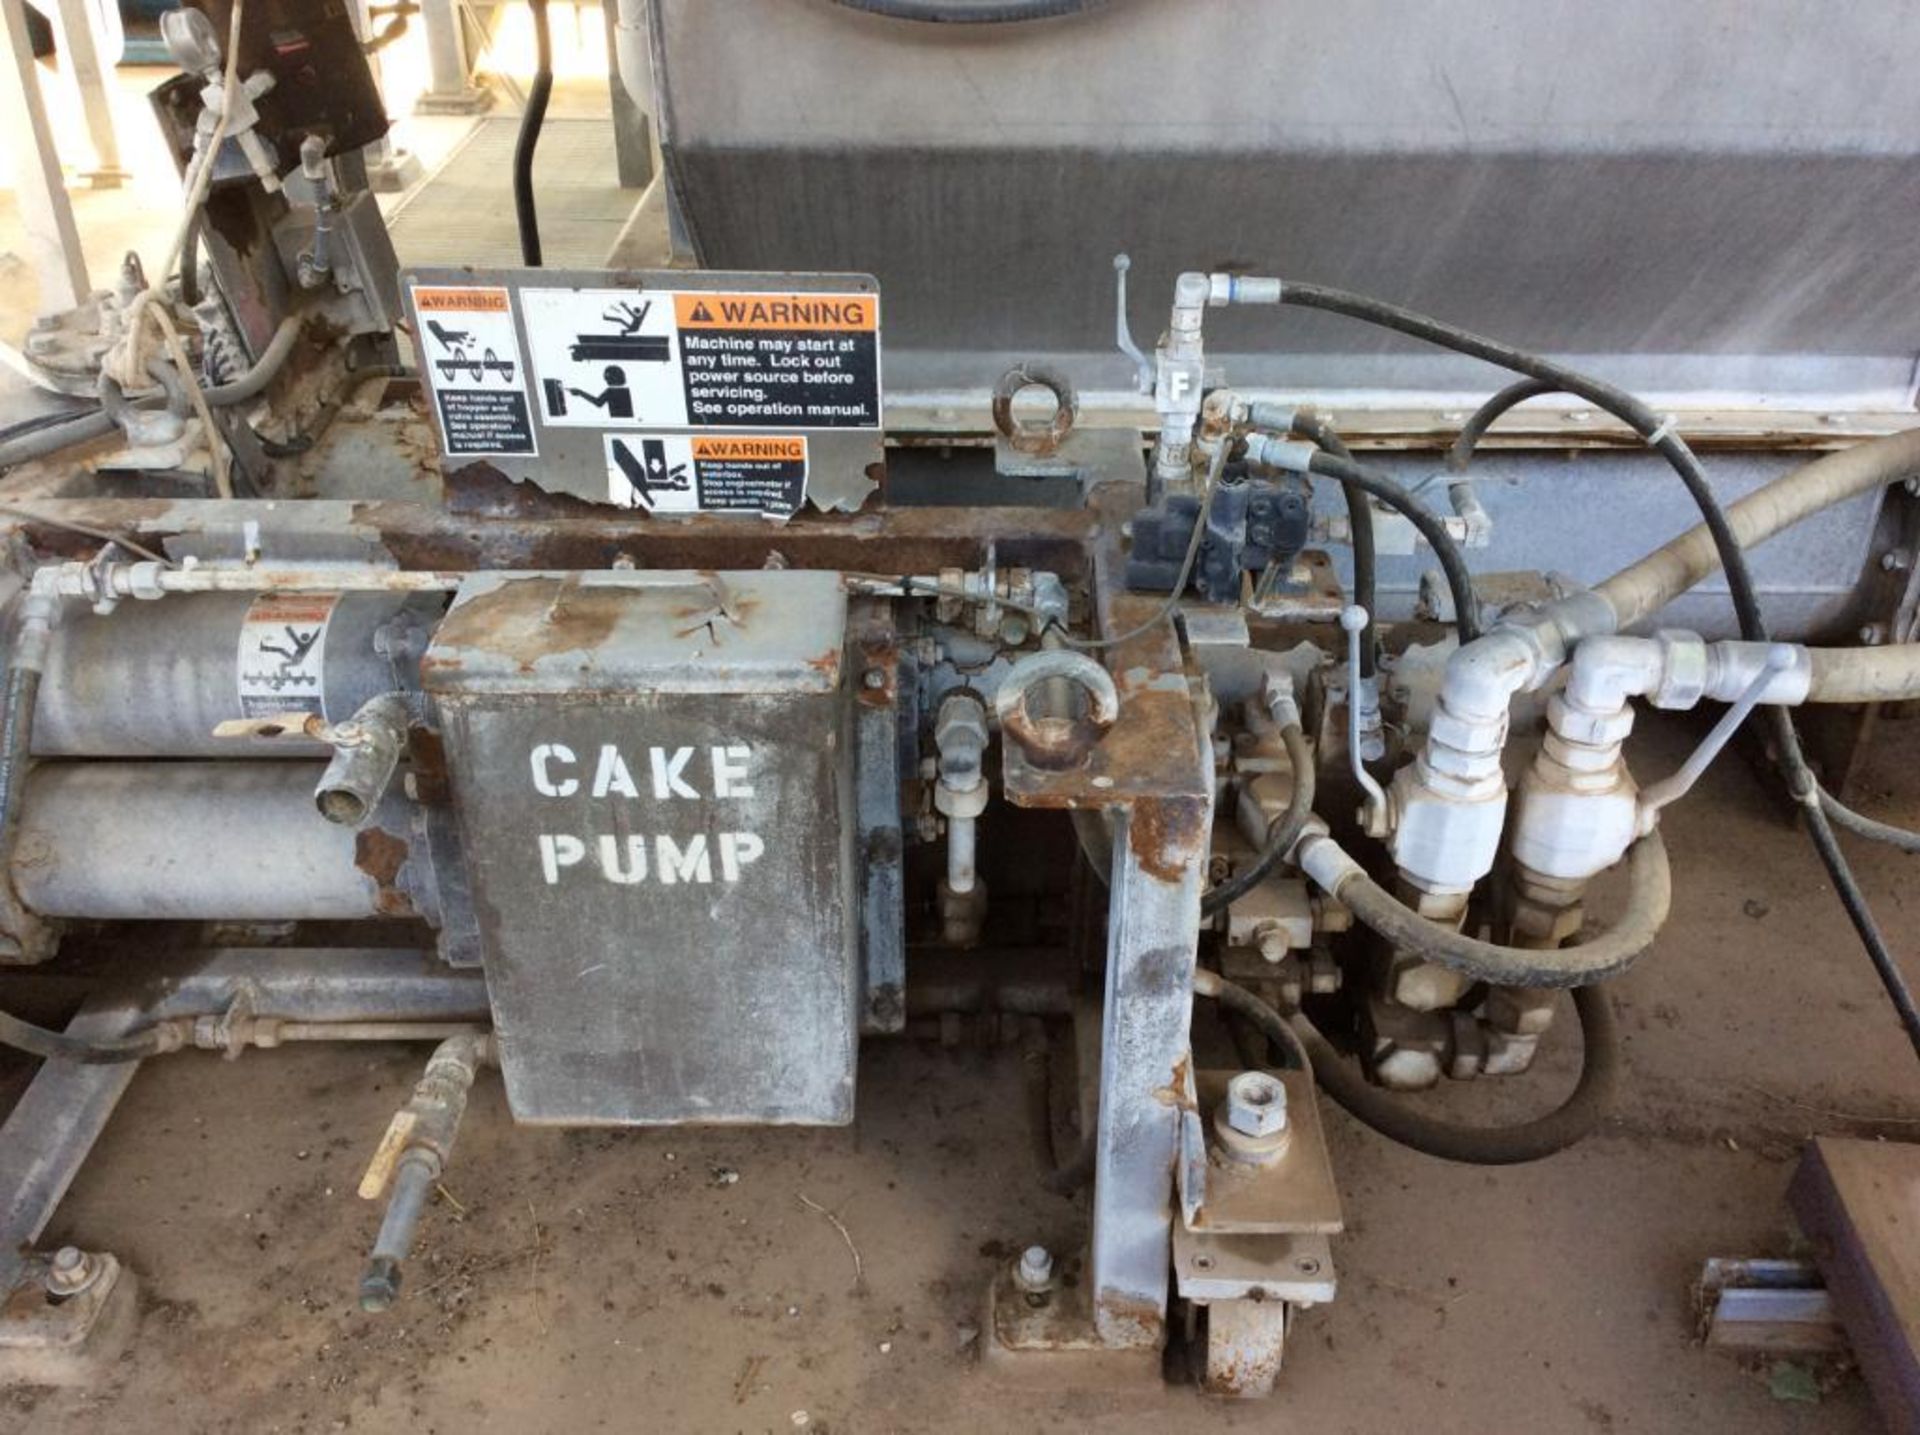 Schwing Hydraulic Pump with cake pump attachment - Image 16 of 20